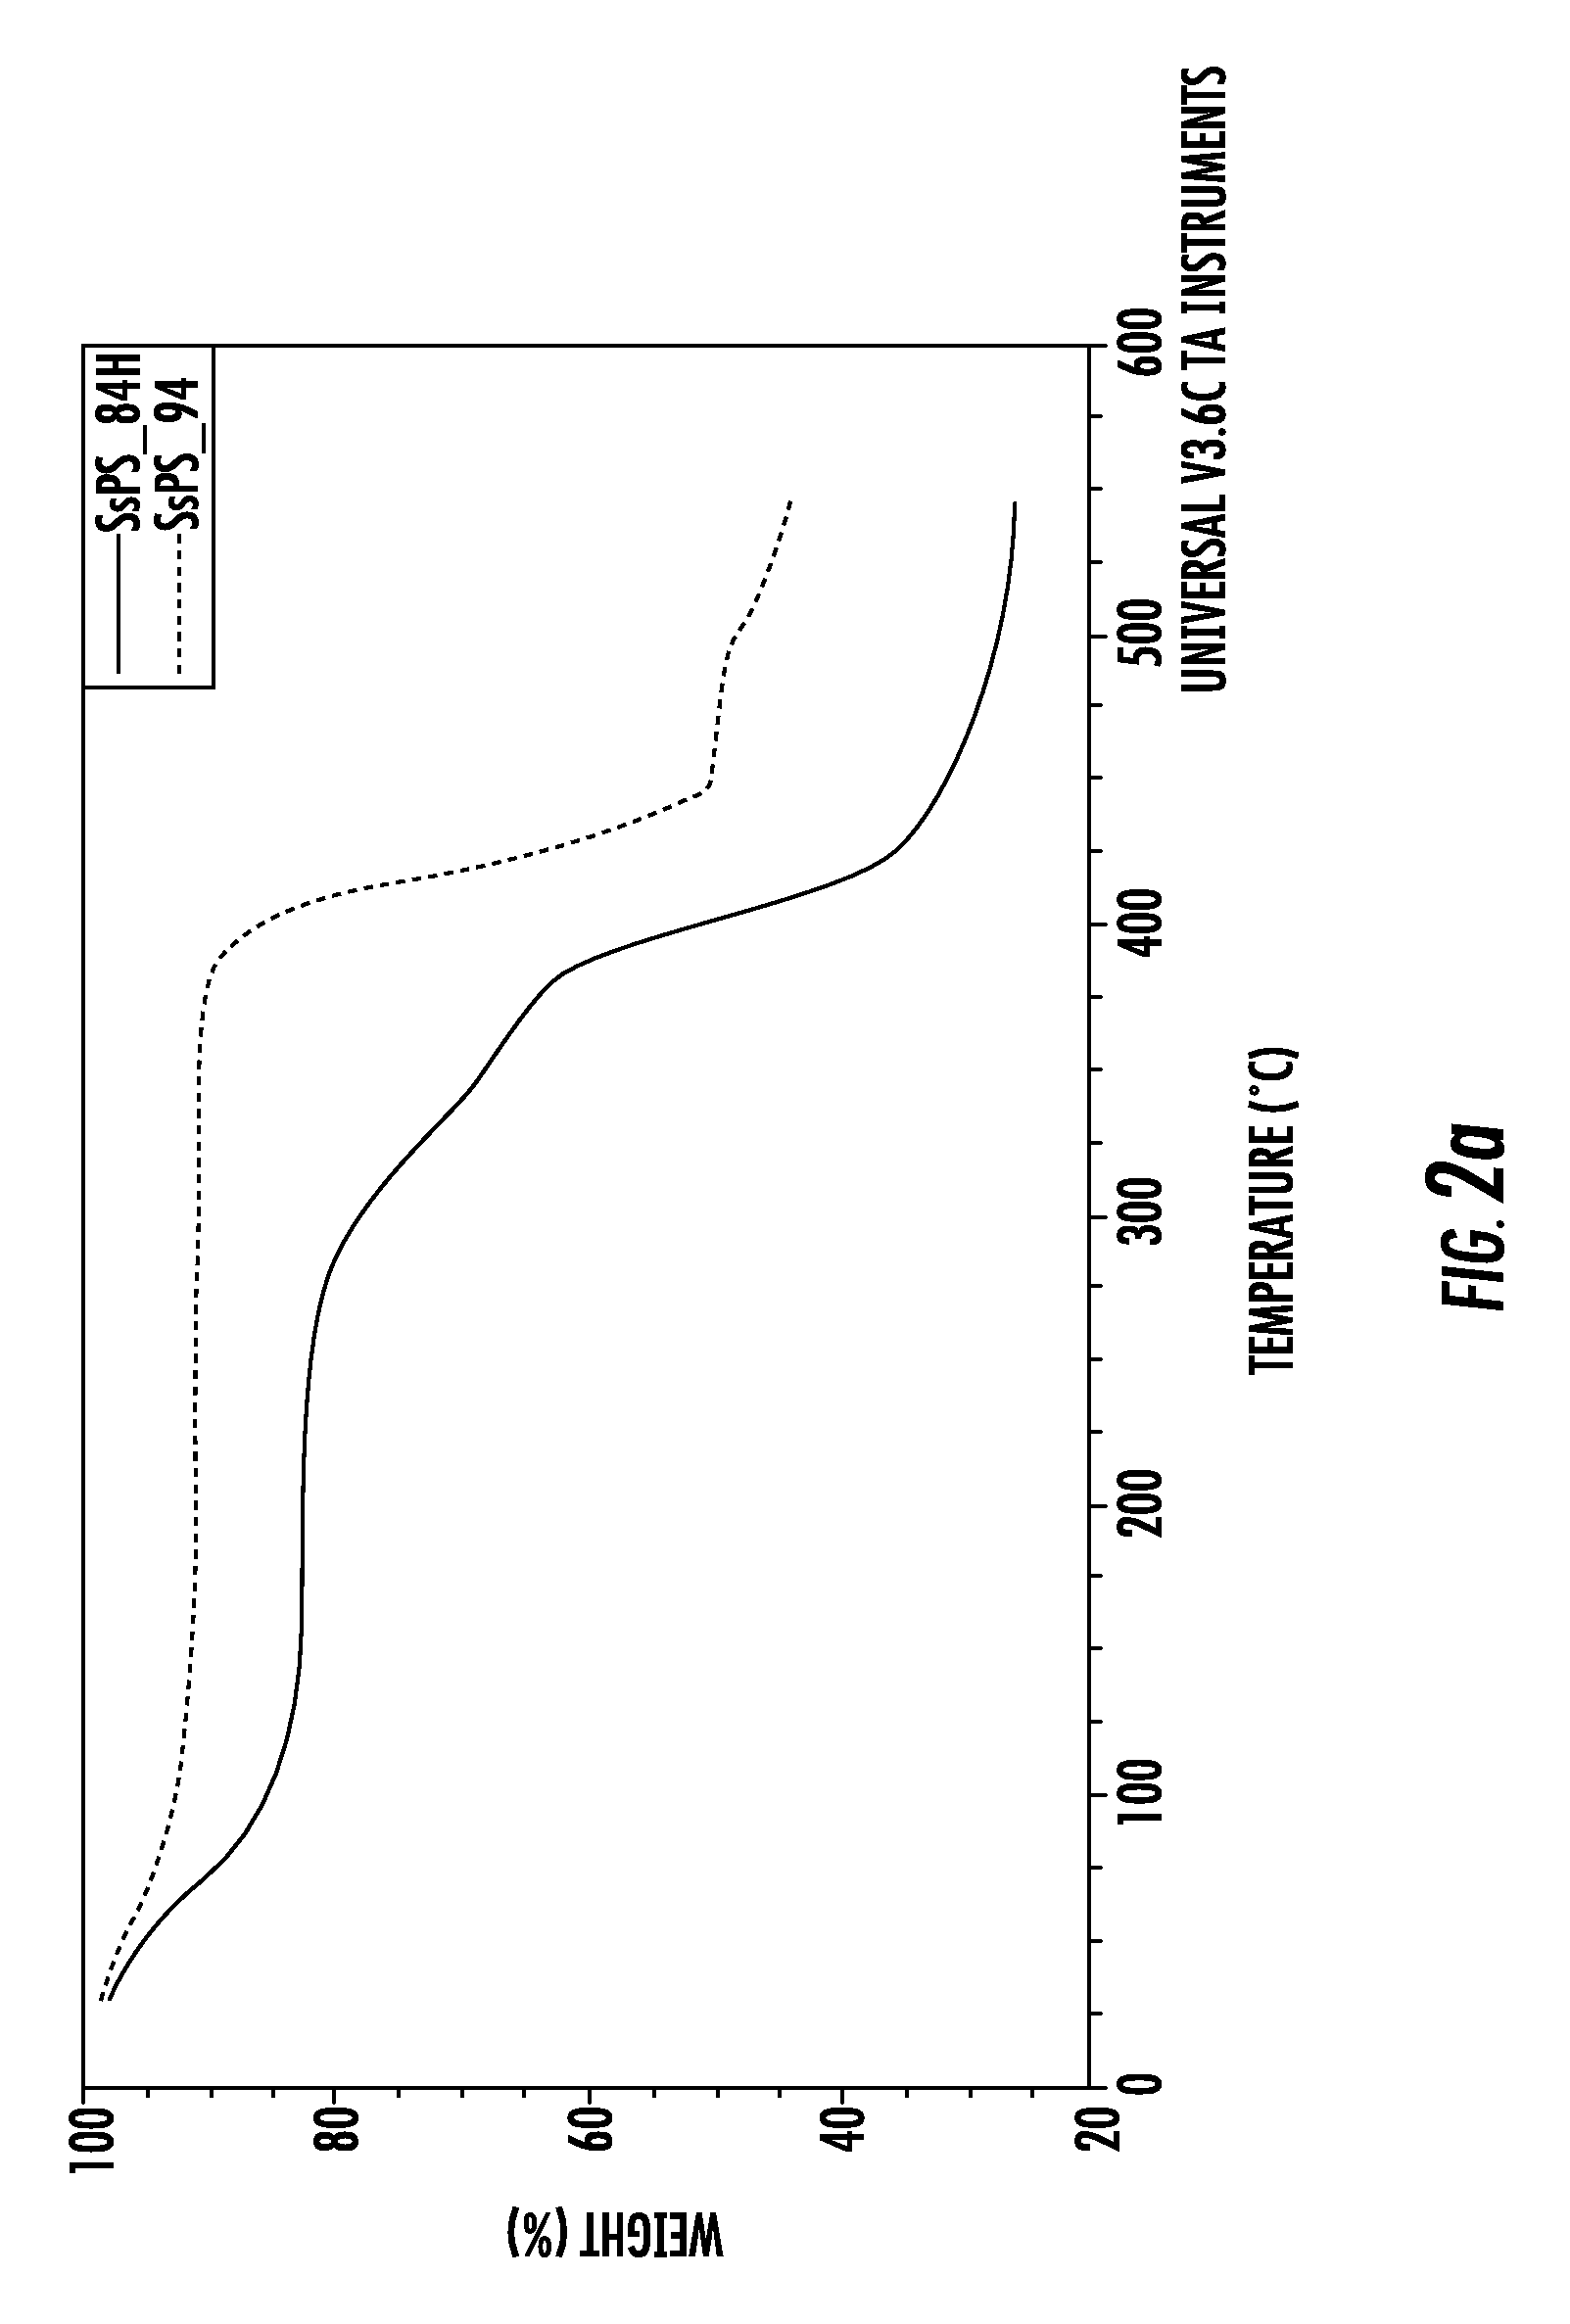 Polyelectrolyte membrane for electrochemical applications, in particular for fuel cells